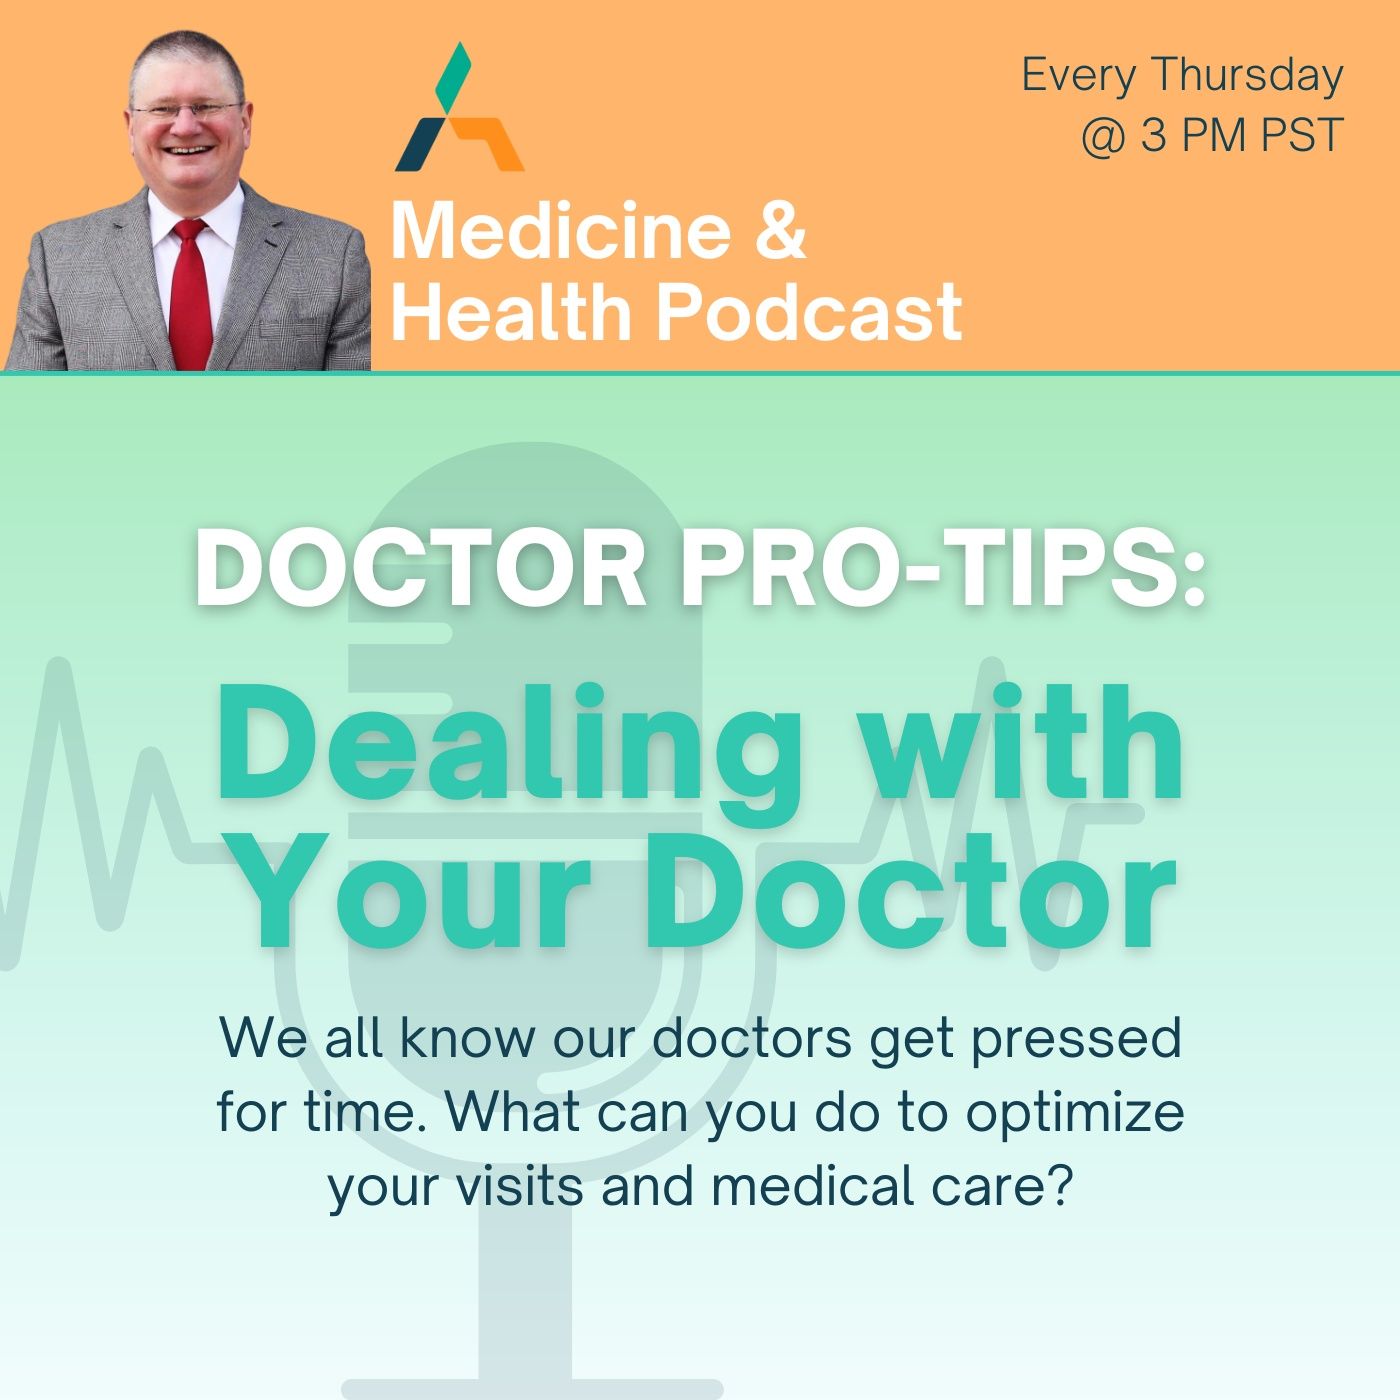 DEALING WITH  YOUR DOCTOR